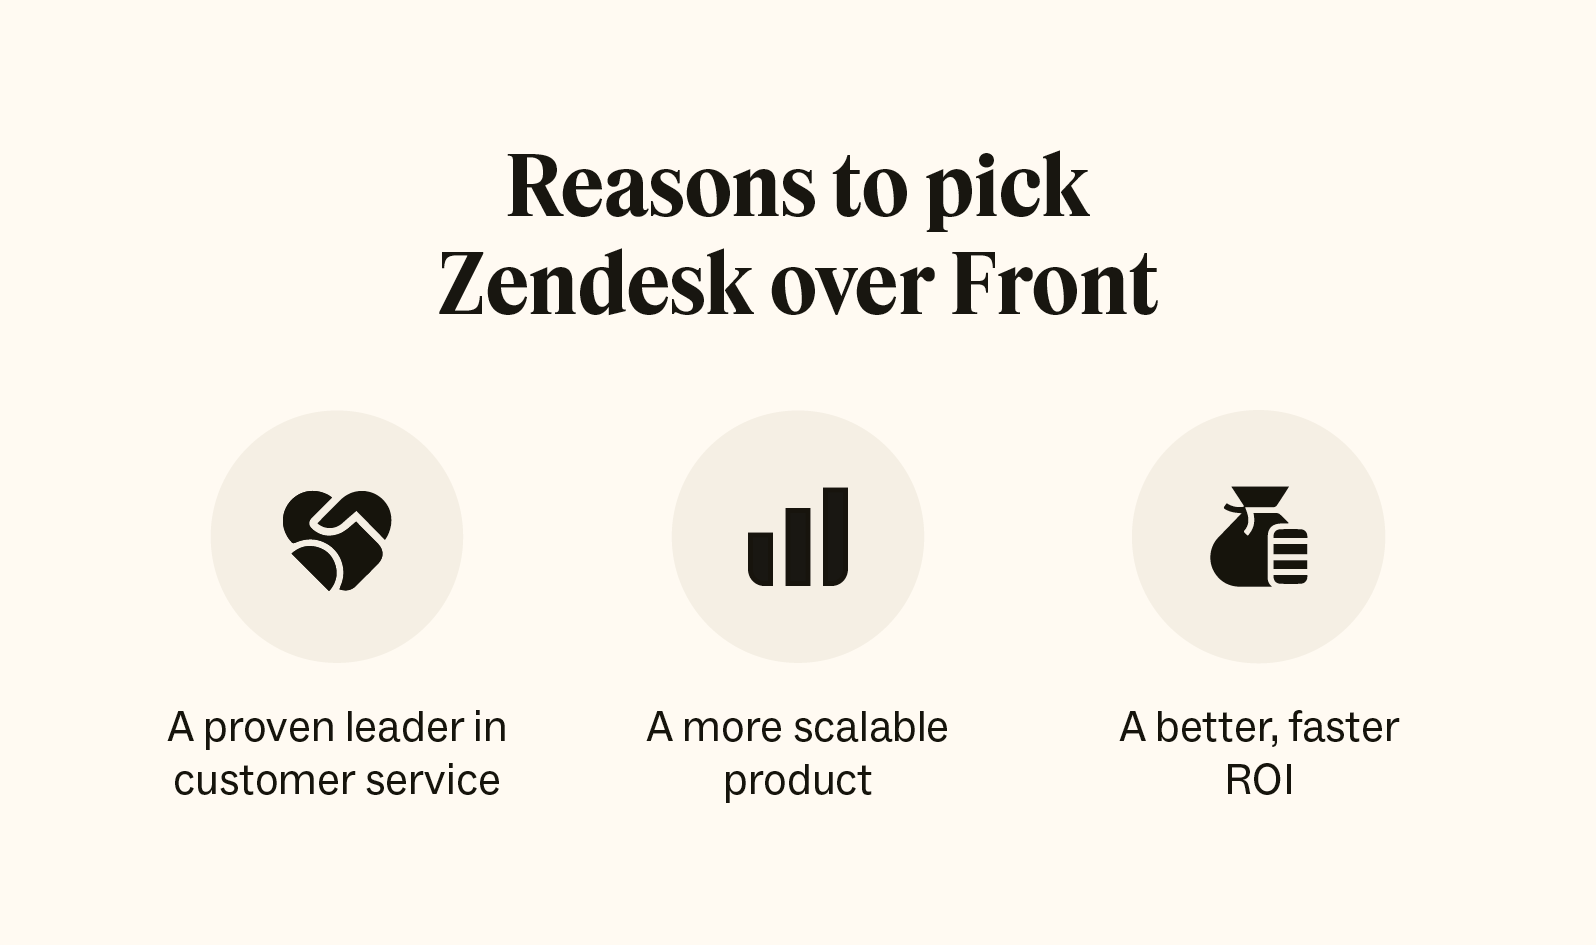 Reasons to pick Zendesk over Front